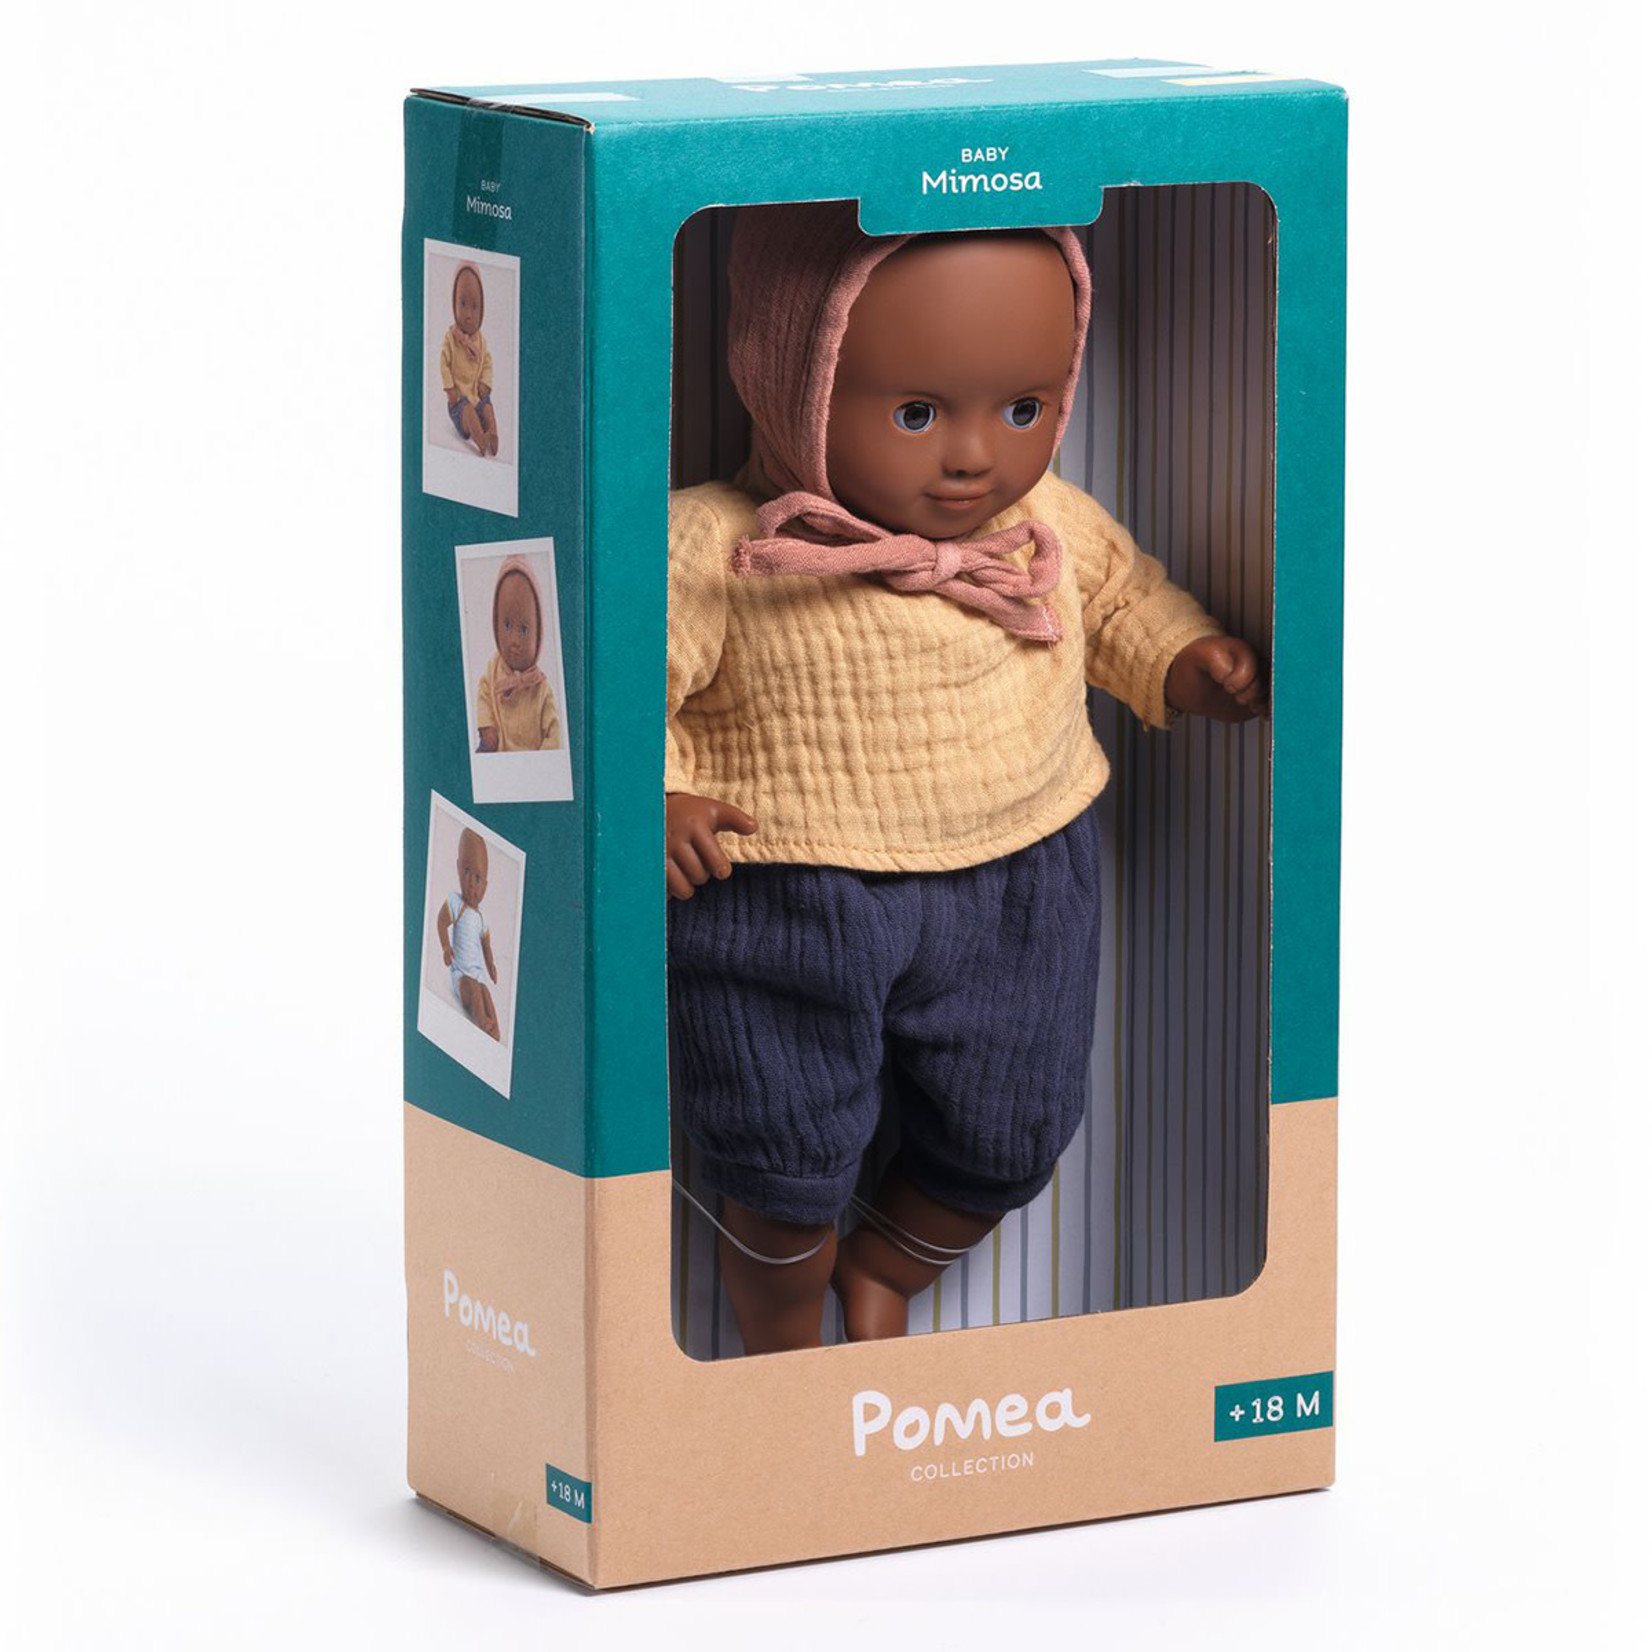 Djeco POMEA - Mimosa doll with clothes